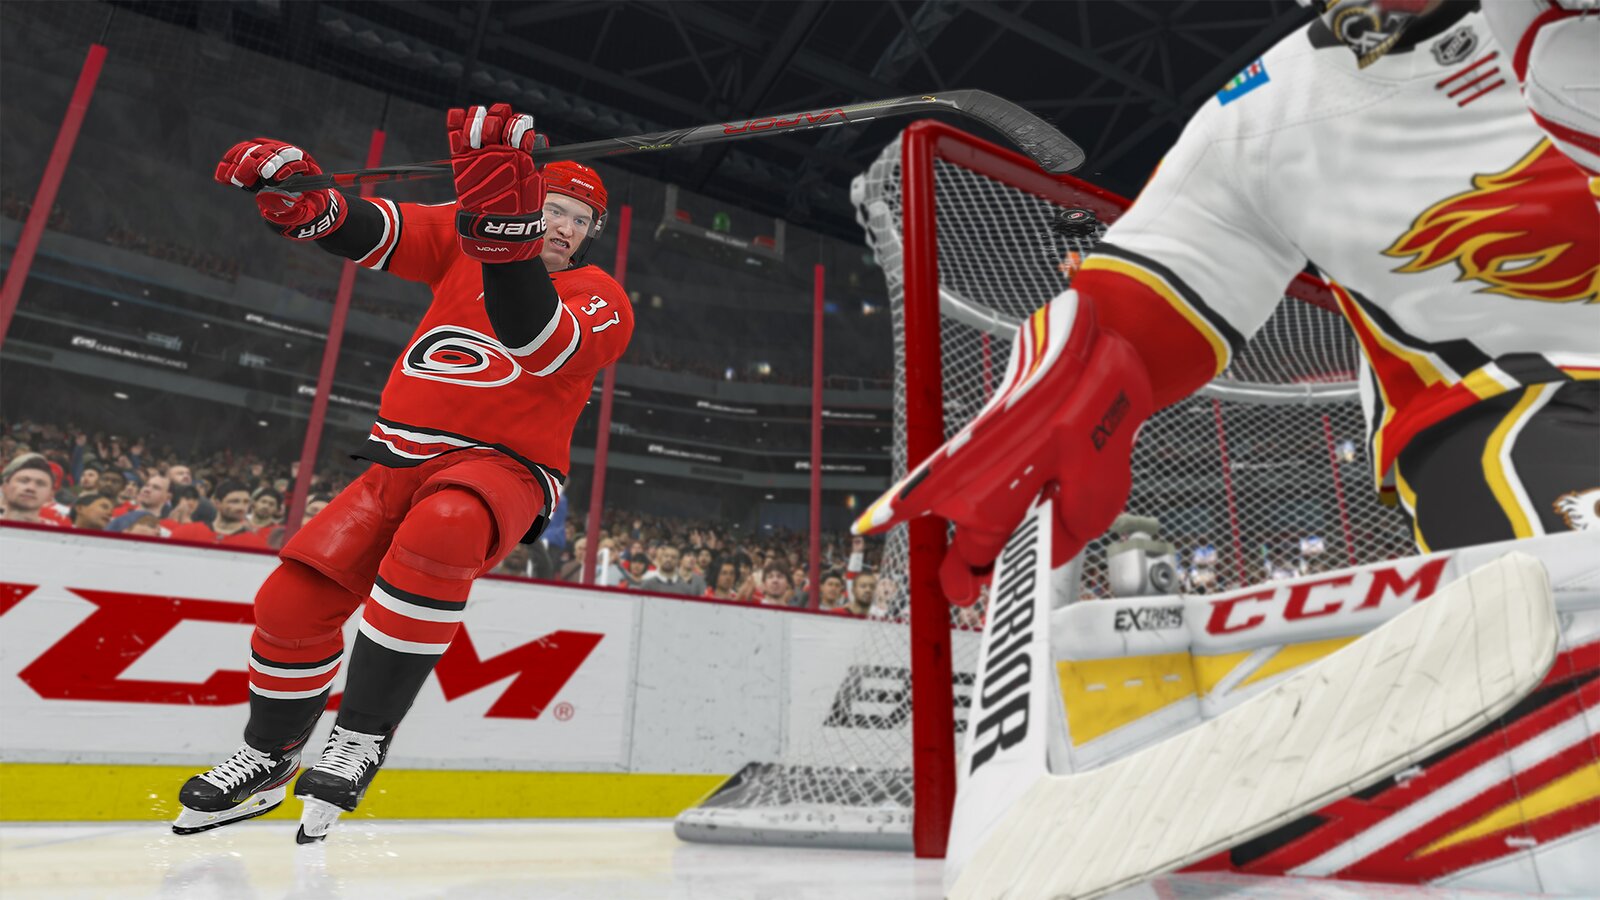 NHL 21 - Great Eight Edition